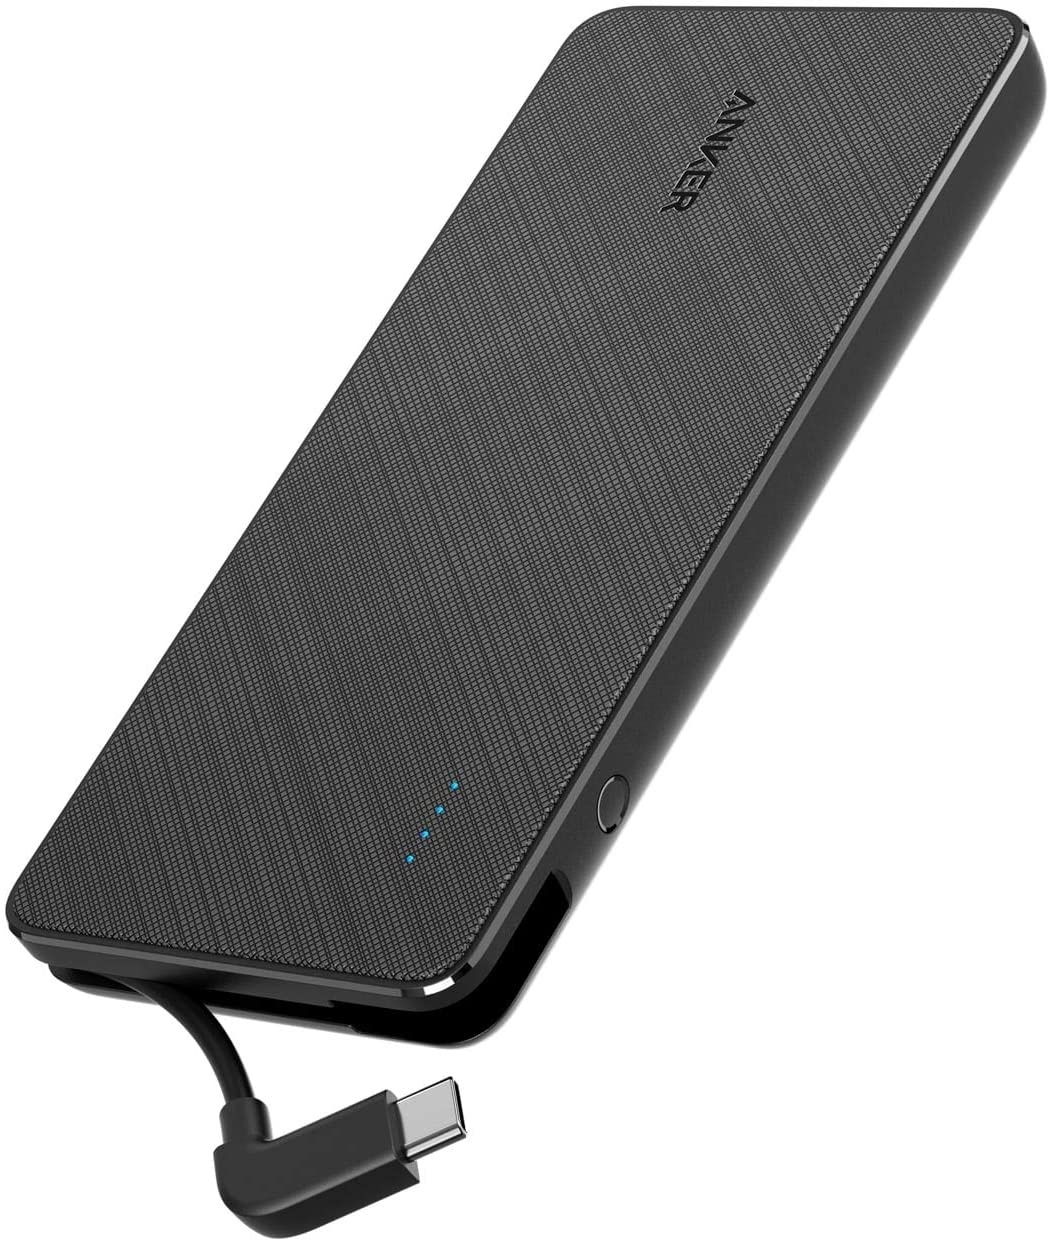 Anker PowerCore+ 10000 Portable Charger With Built-In USB-C Cable (Black)